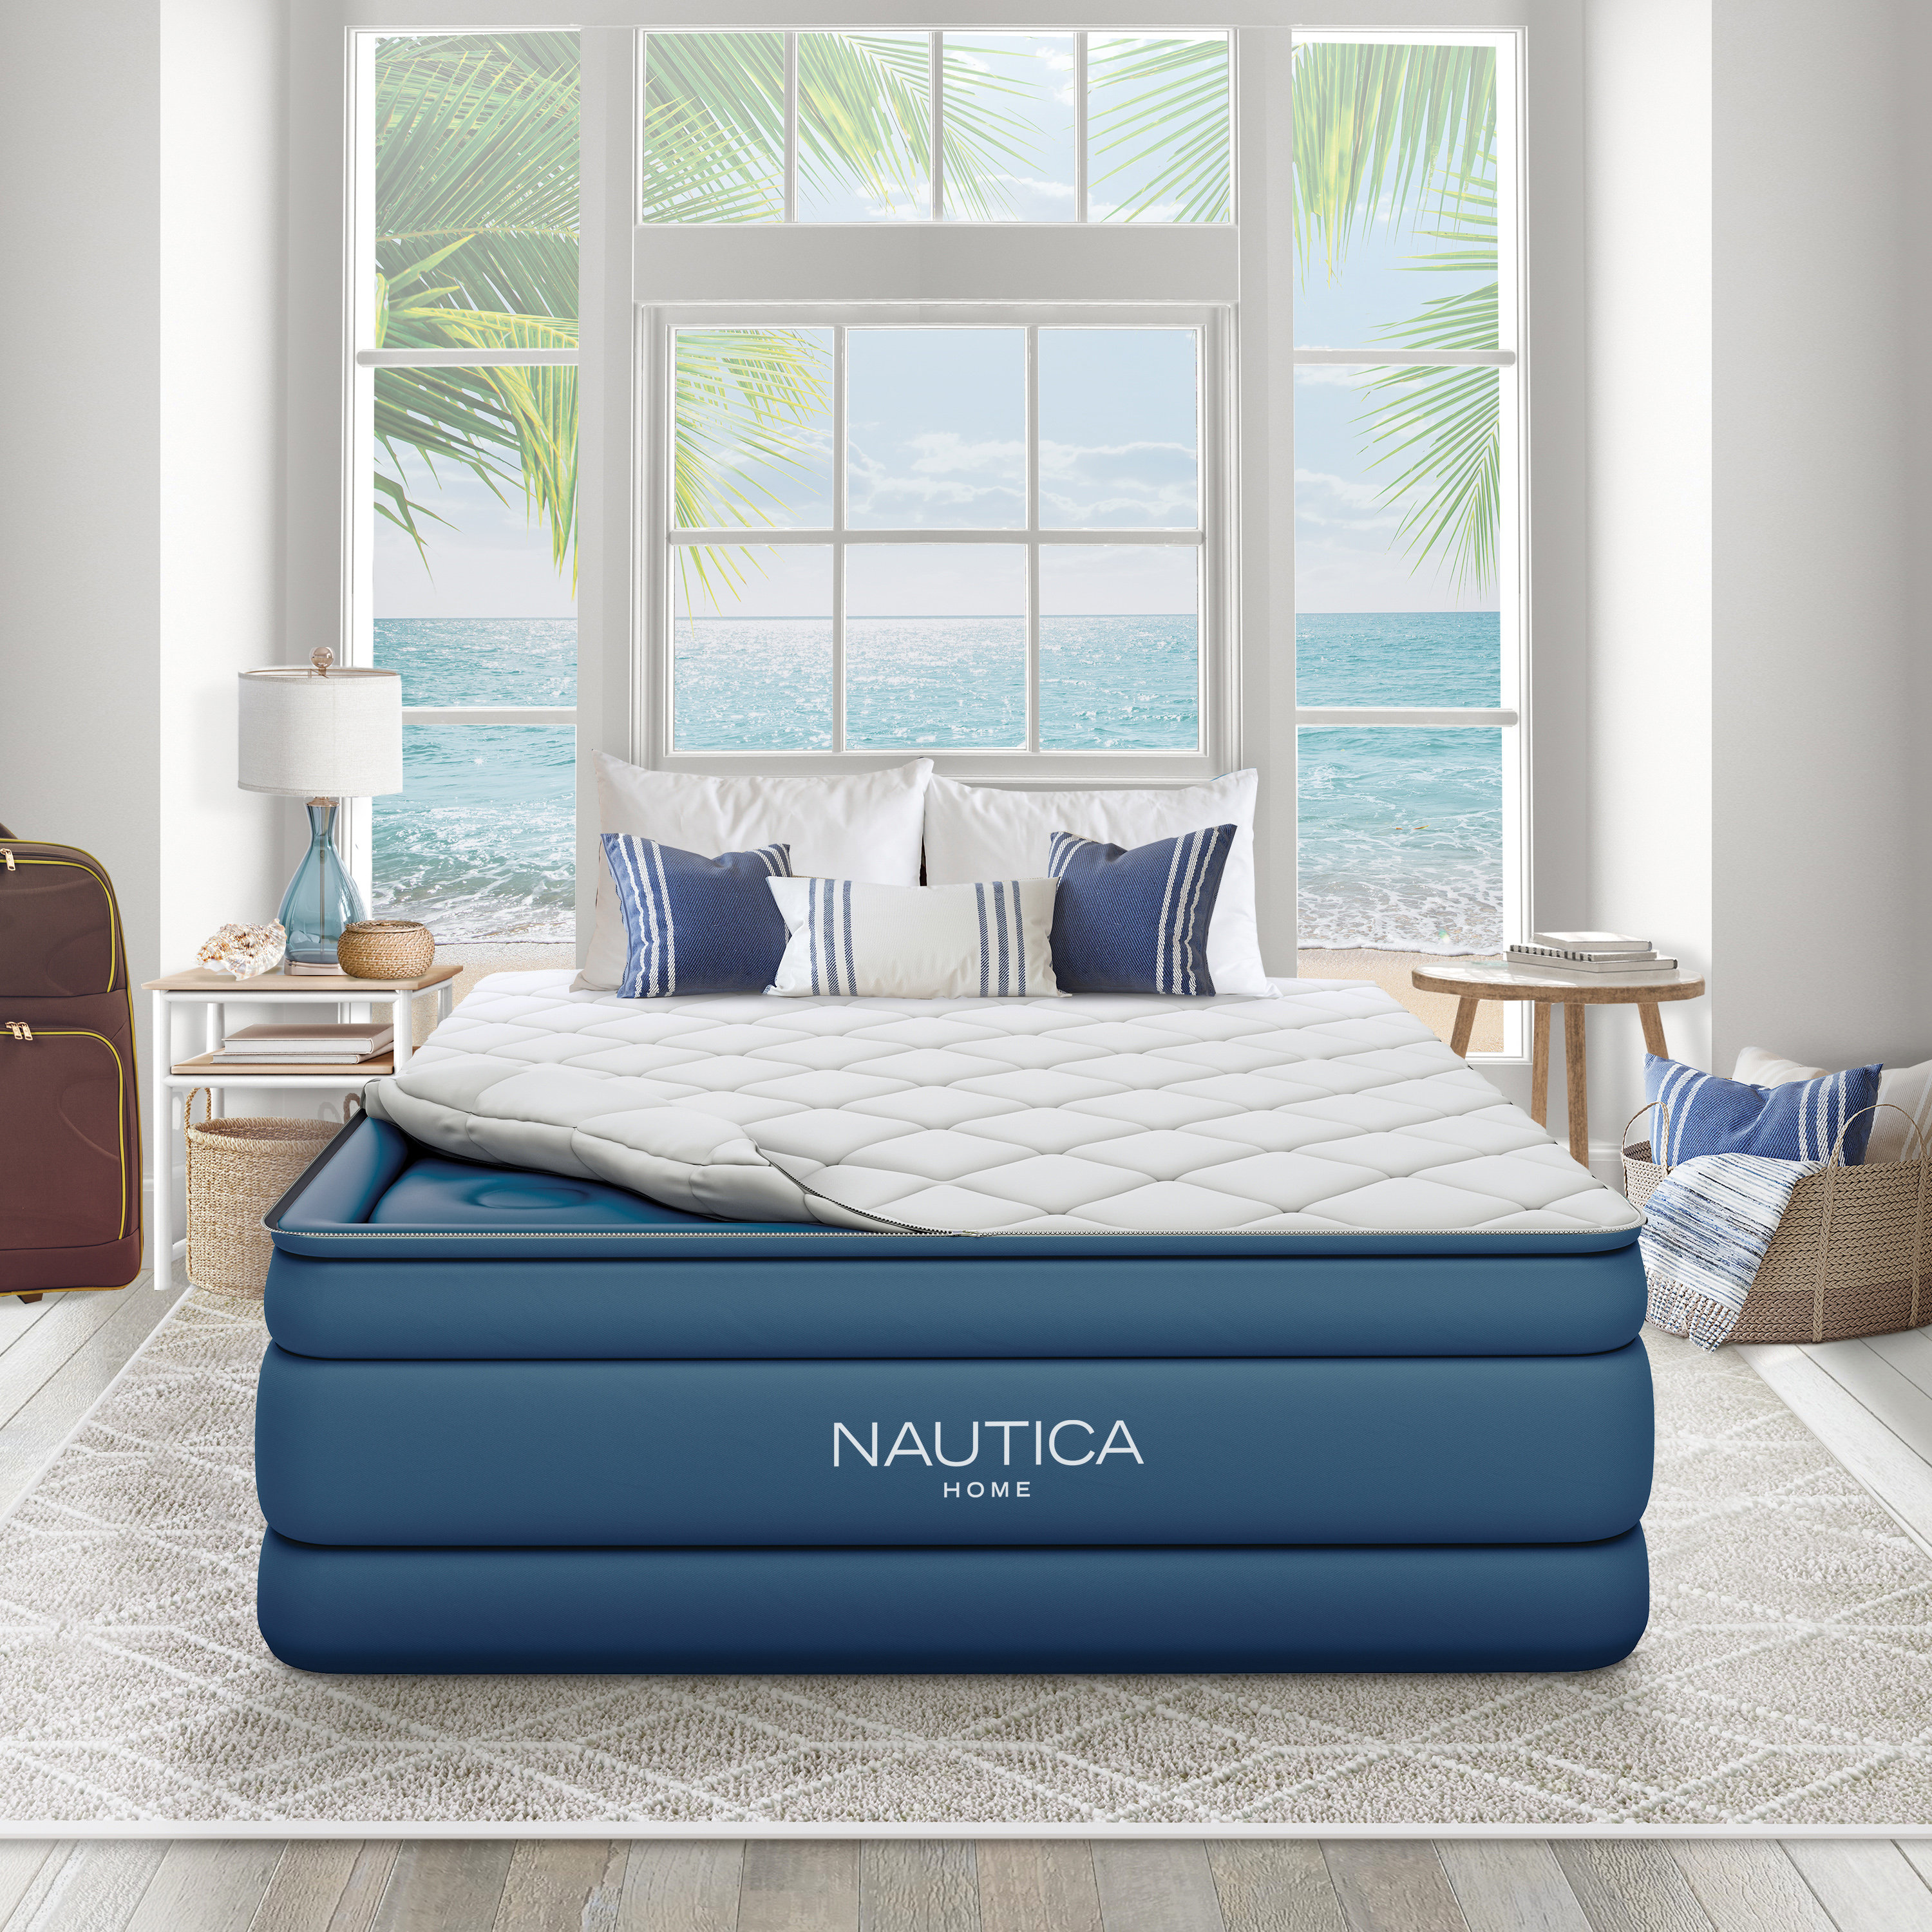 SUGIFT Air mattress Queen Size Air Bed with built-in Pump Deluxe Air bed  Double Queen Size Air Bed 